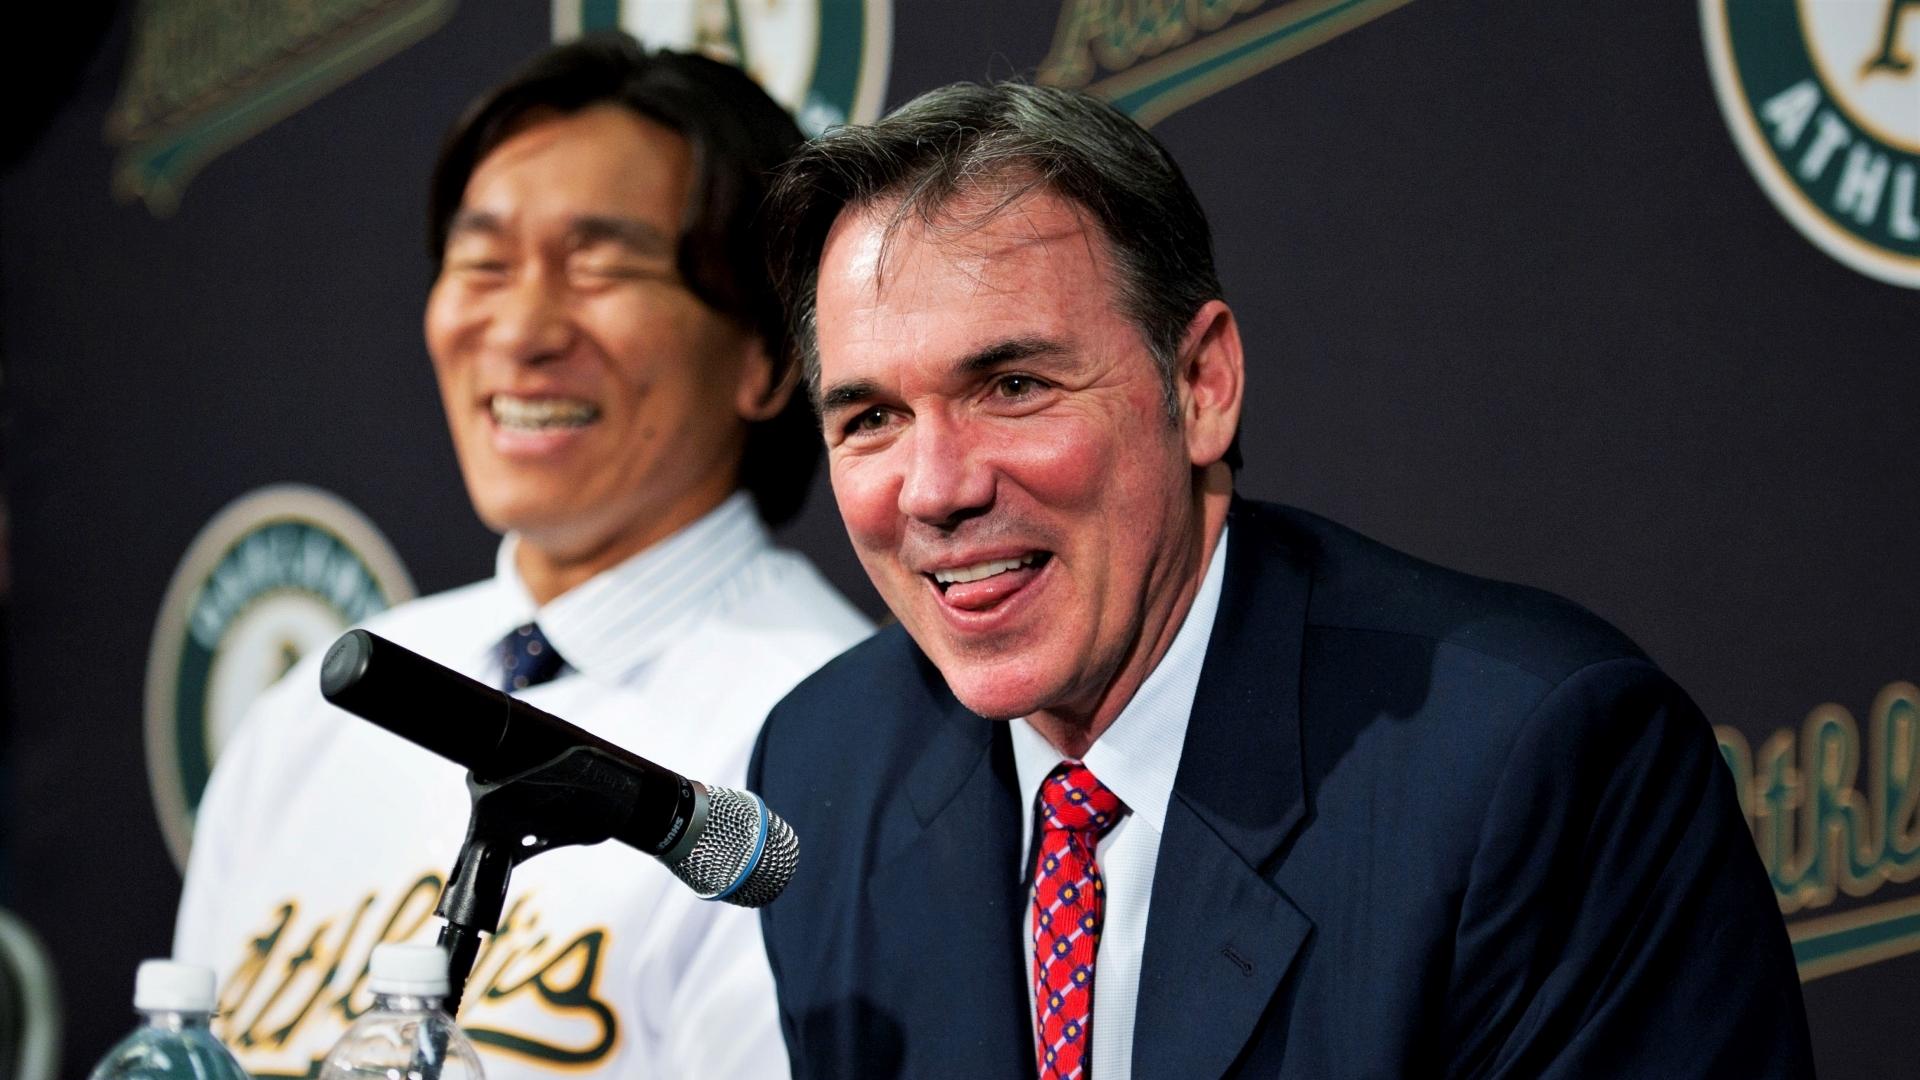 Oakland Athletics general manager Billy Beane (right) smiles while addressing the media as designated hitter Hideki Matsui (left) looks on during a press conference following Matsui signing with the Athletics at Oakland-Alameda County Coliseum. Mandatory Credit: Kyle Terada-USA TODAY Sports